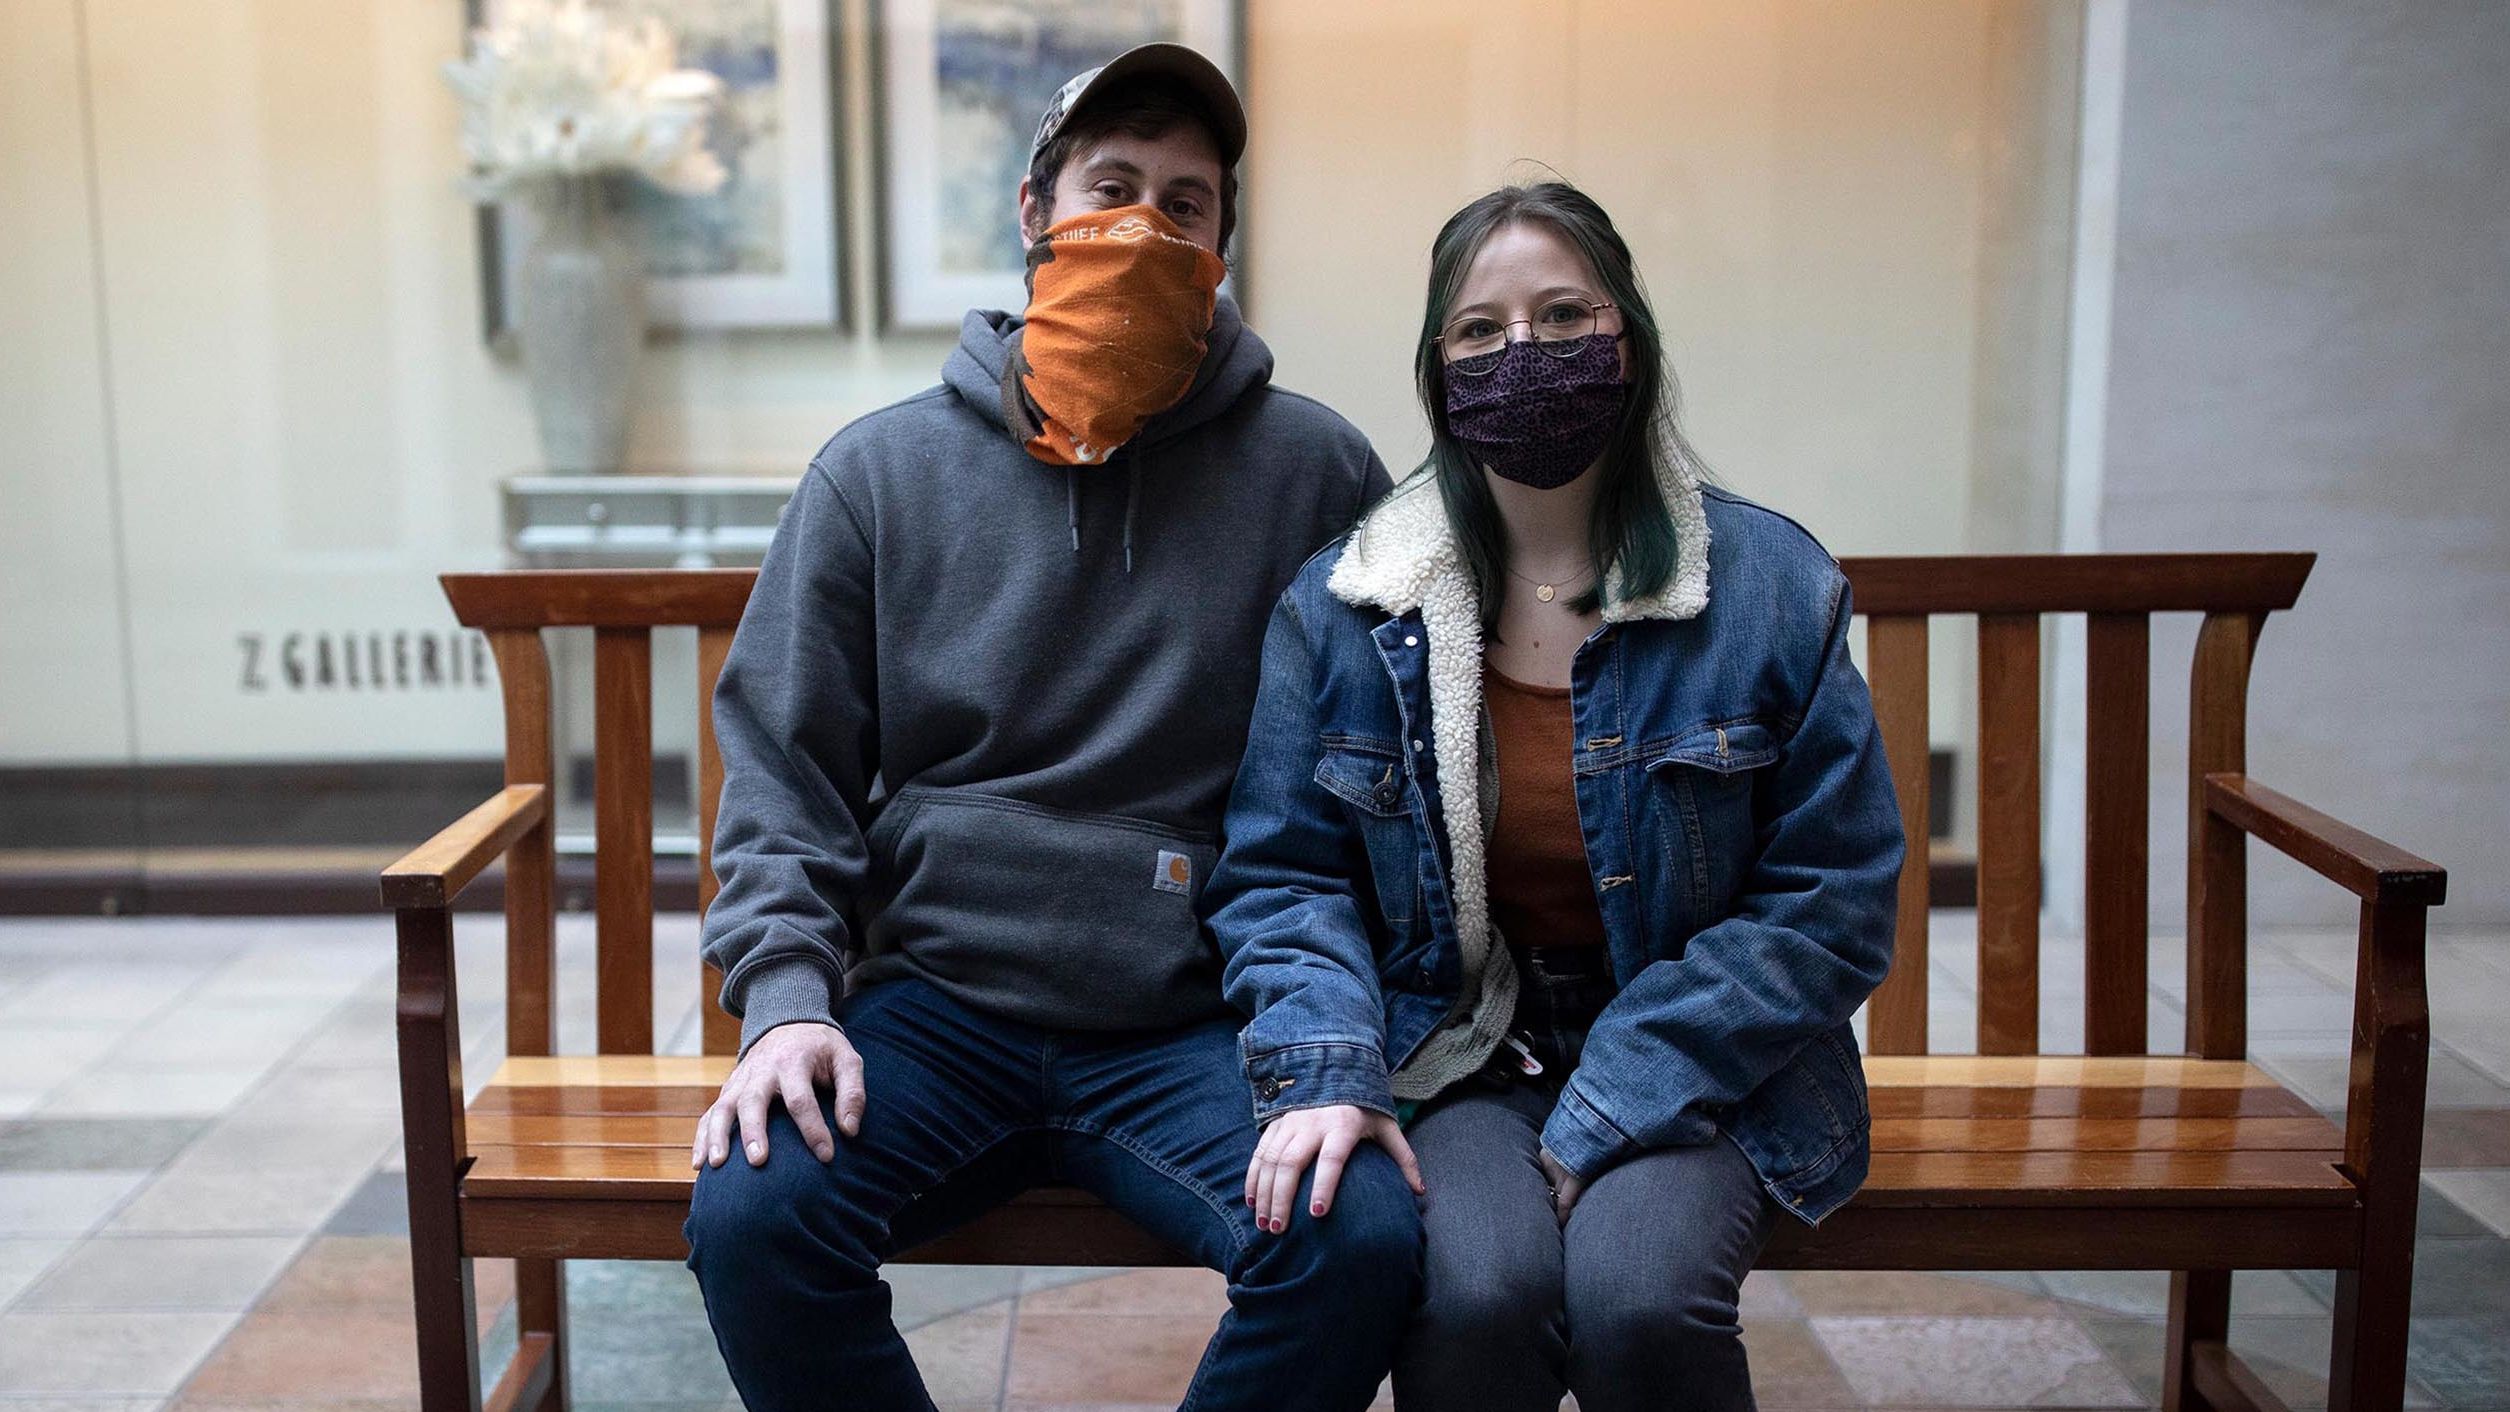 Matthew LaBelle, 28, and Heather McClintock, 24, masked up last week to run errands in a Louisville, Kentucky, mall on January 24. It's "important to stay diligent," McClintock said.